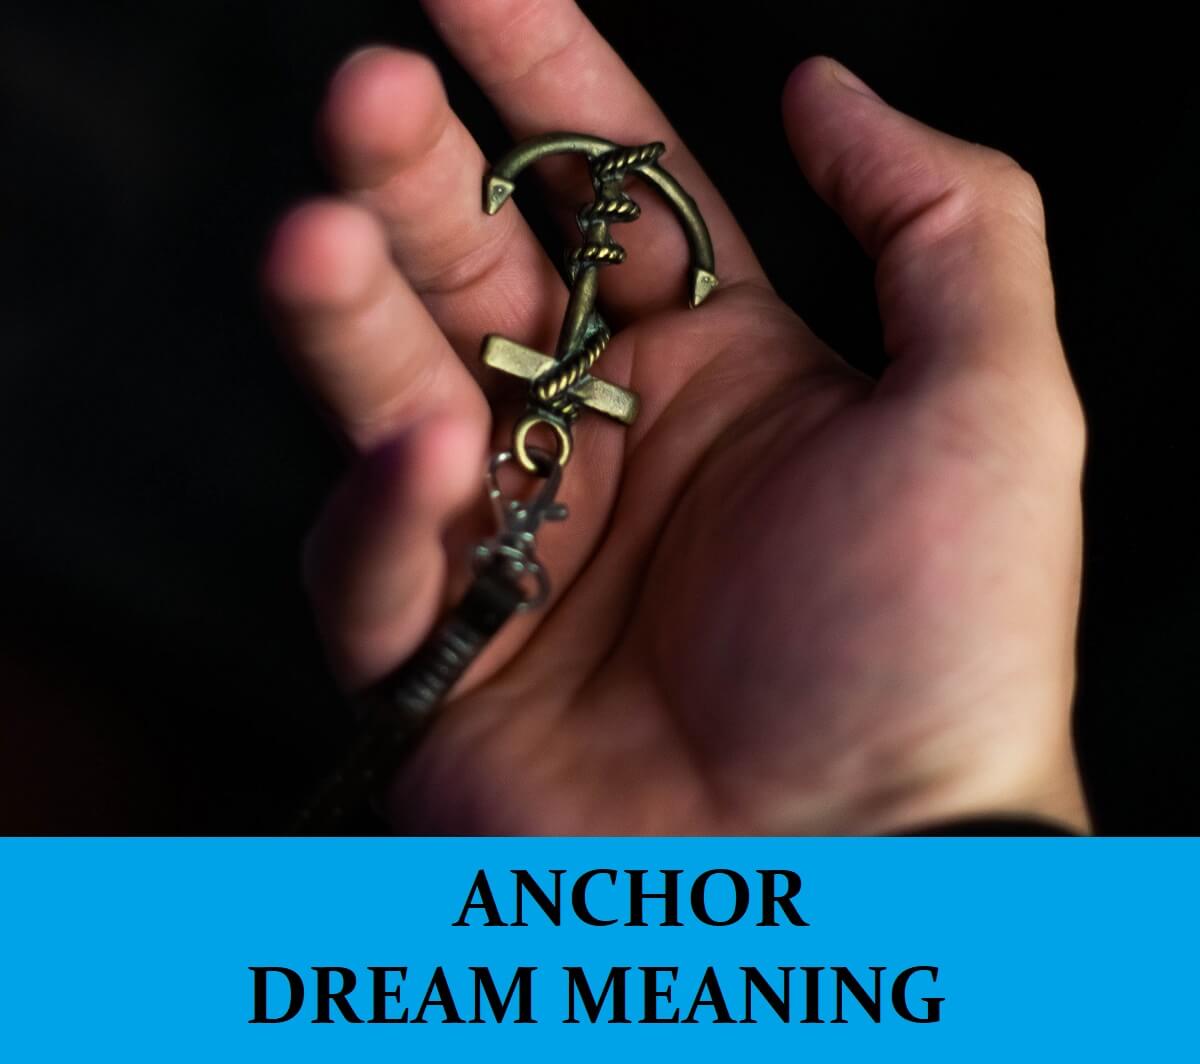 Dream About Anchors